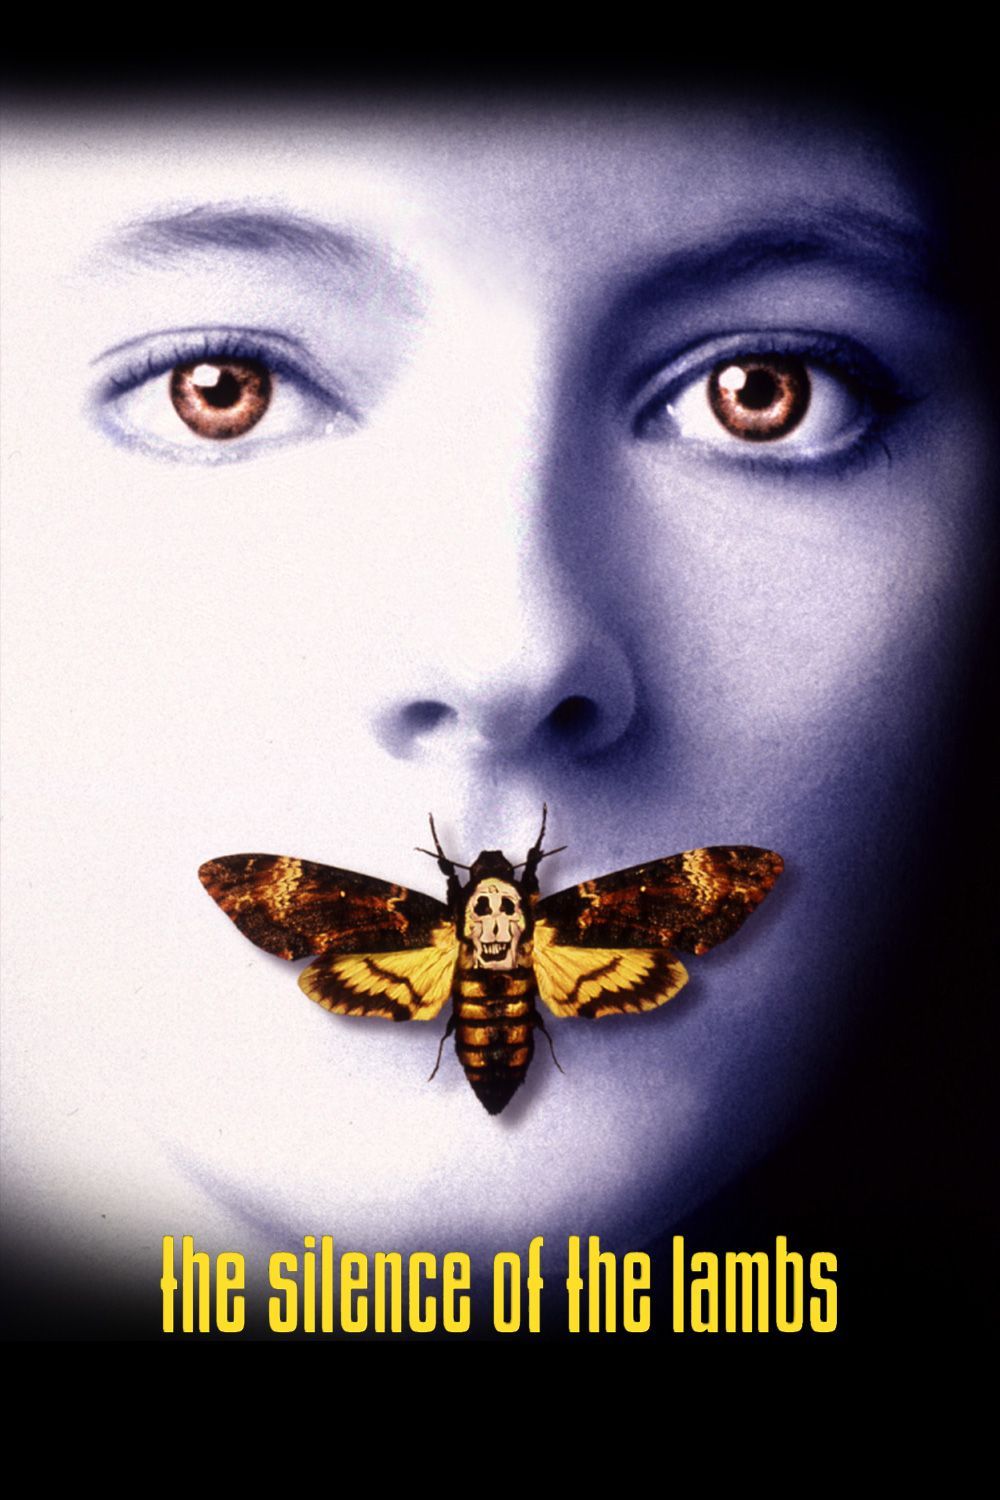 1330x748px The Silence Of The Lambs 509.68 KB #347232